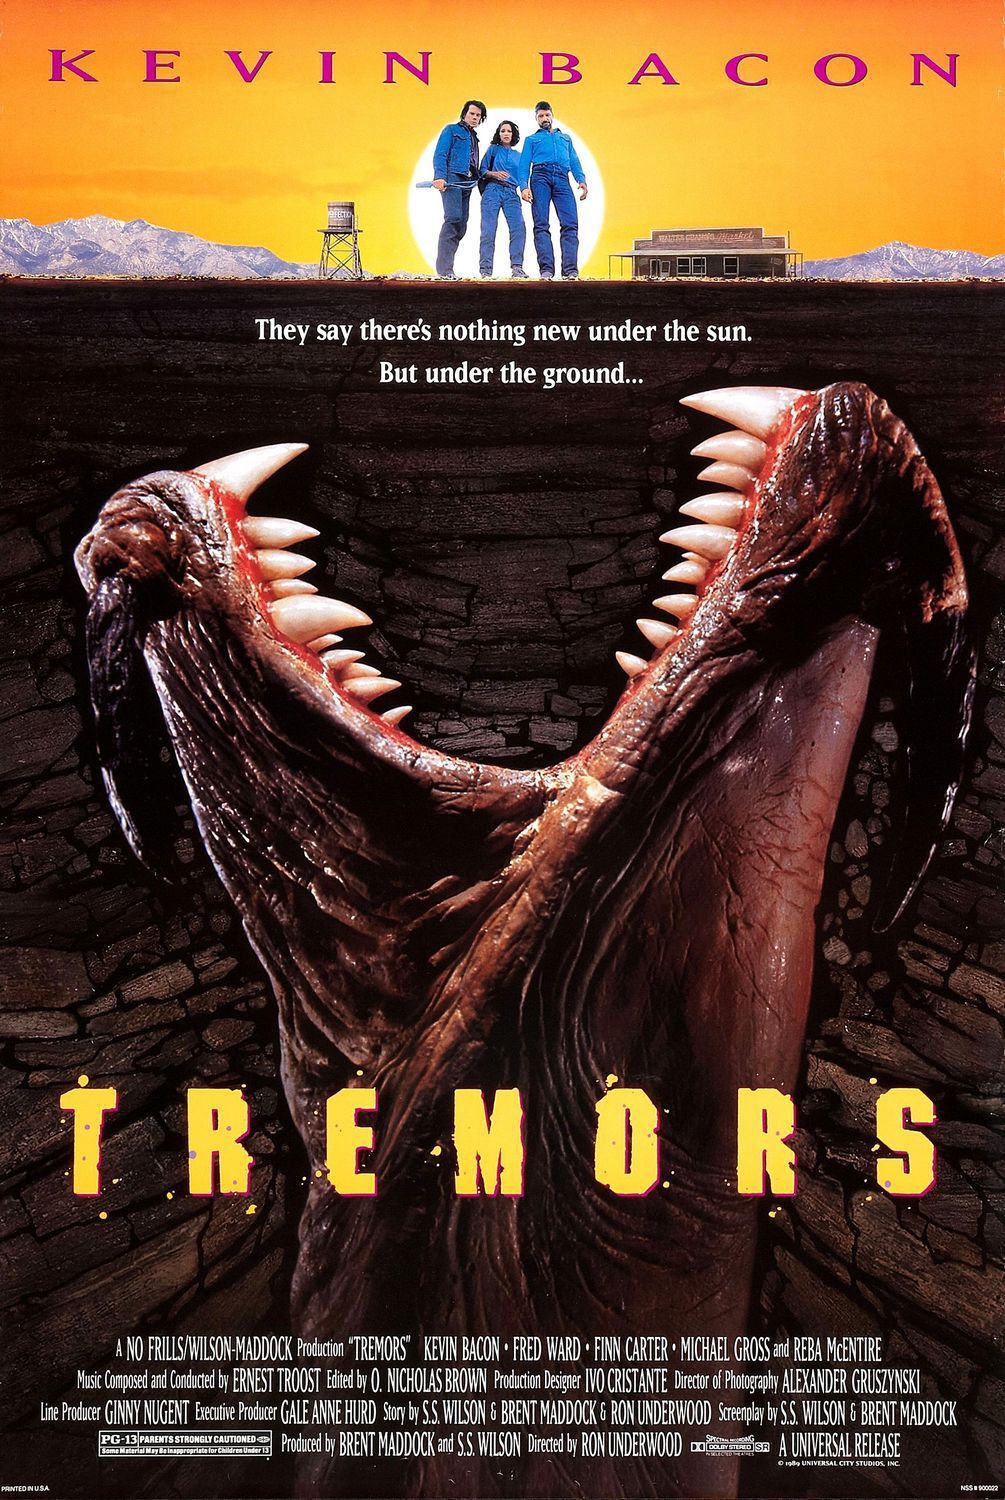 The movie poster for Tremors